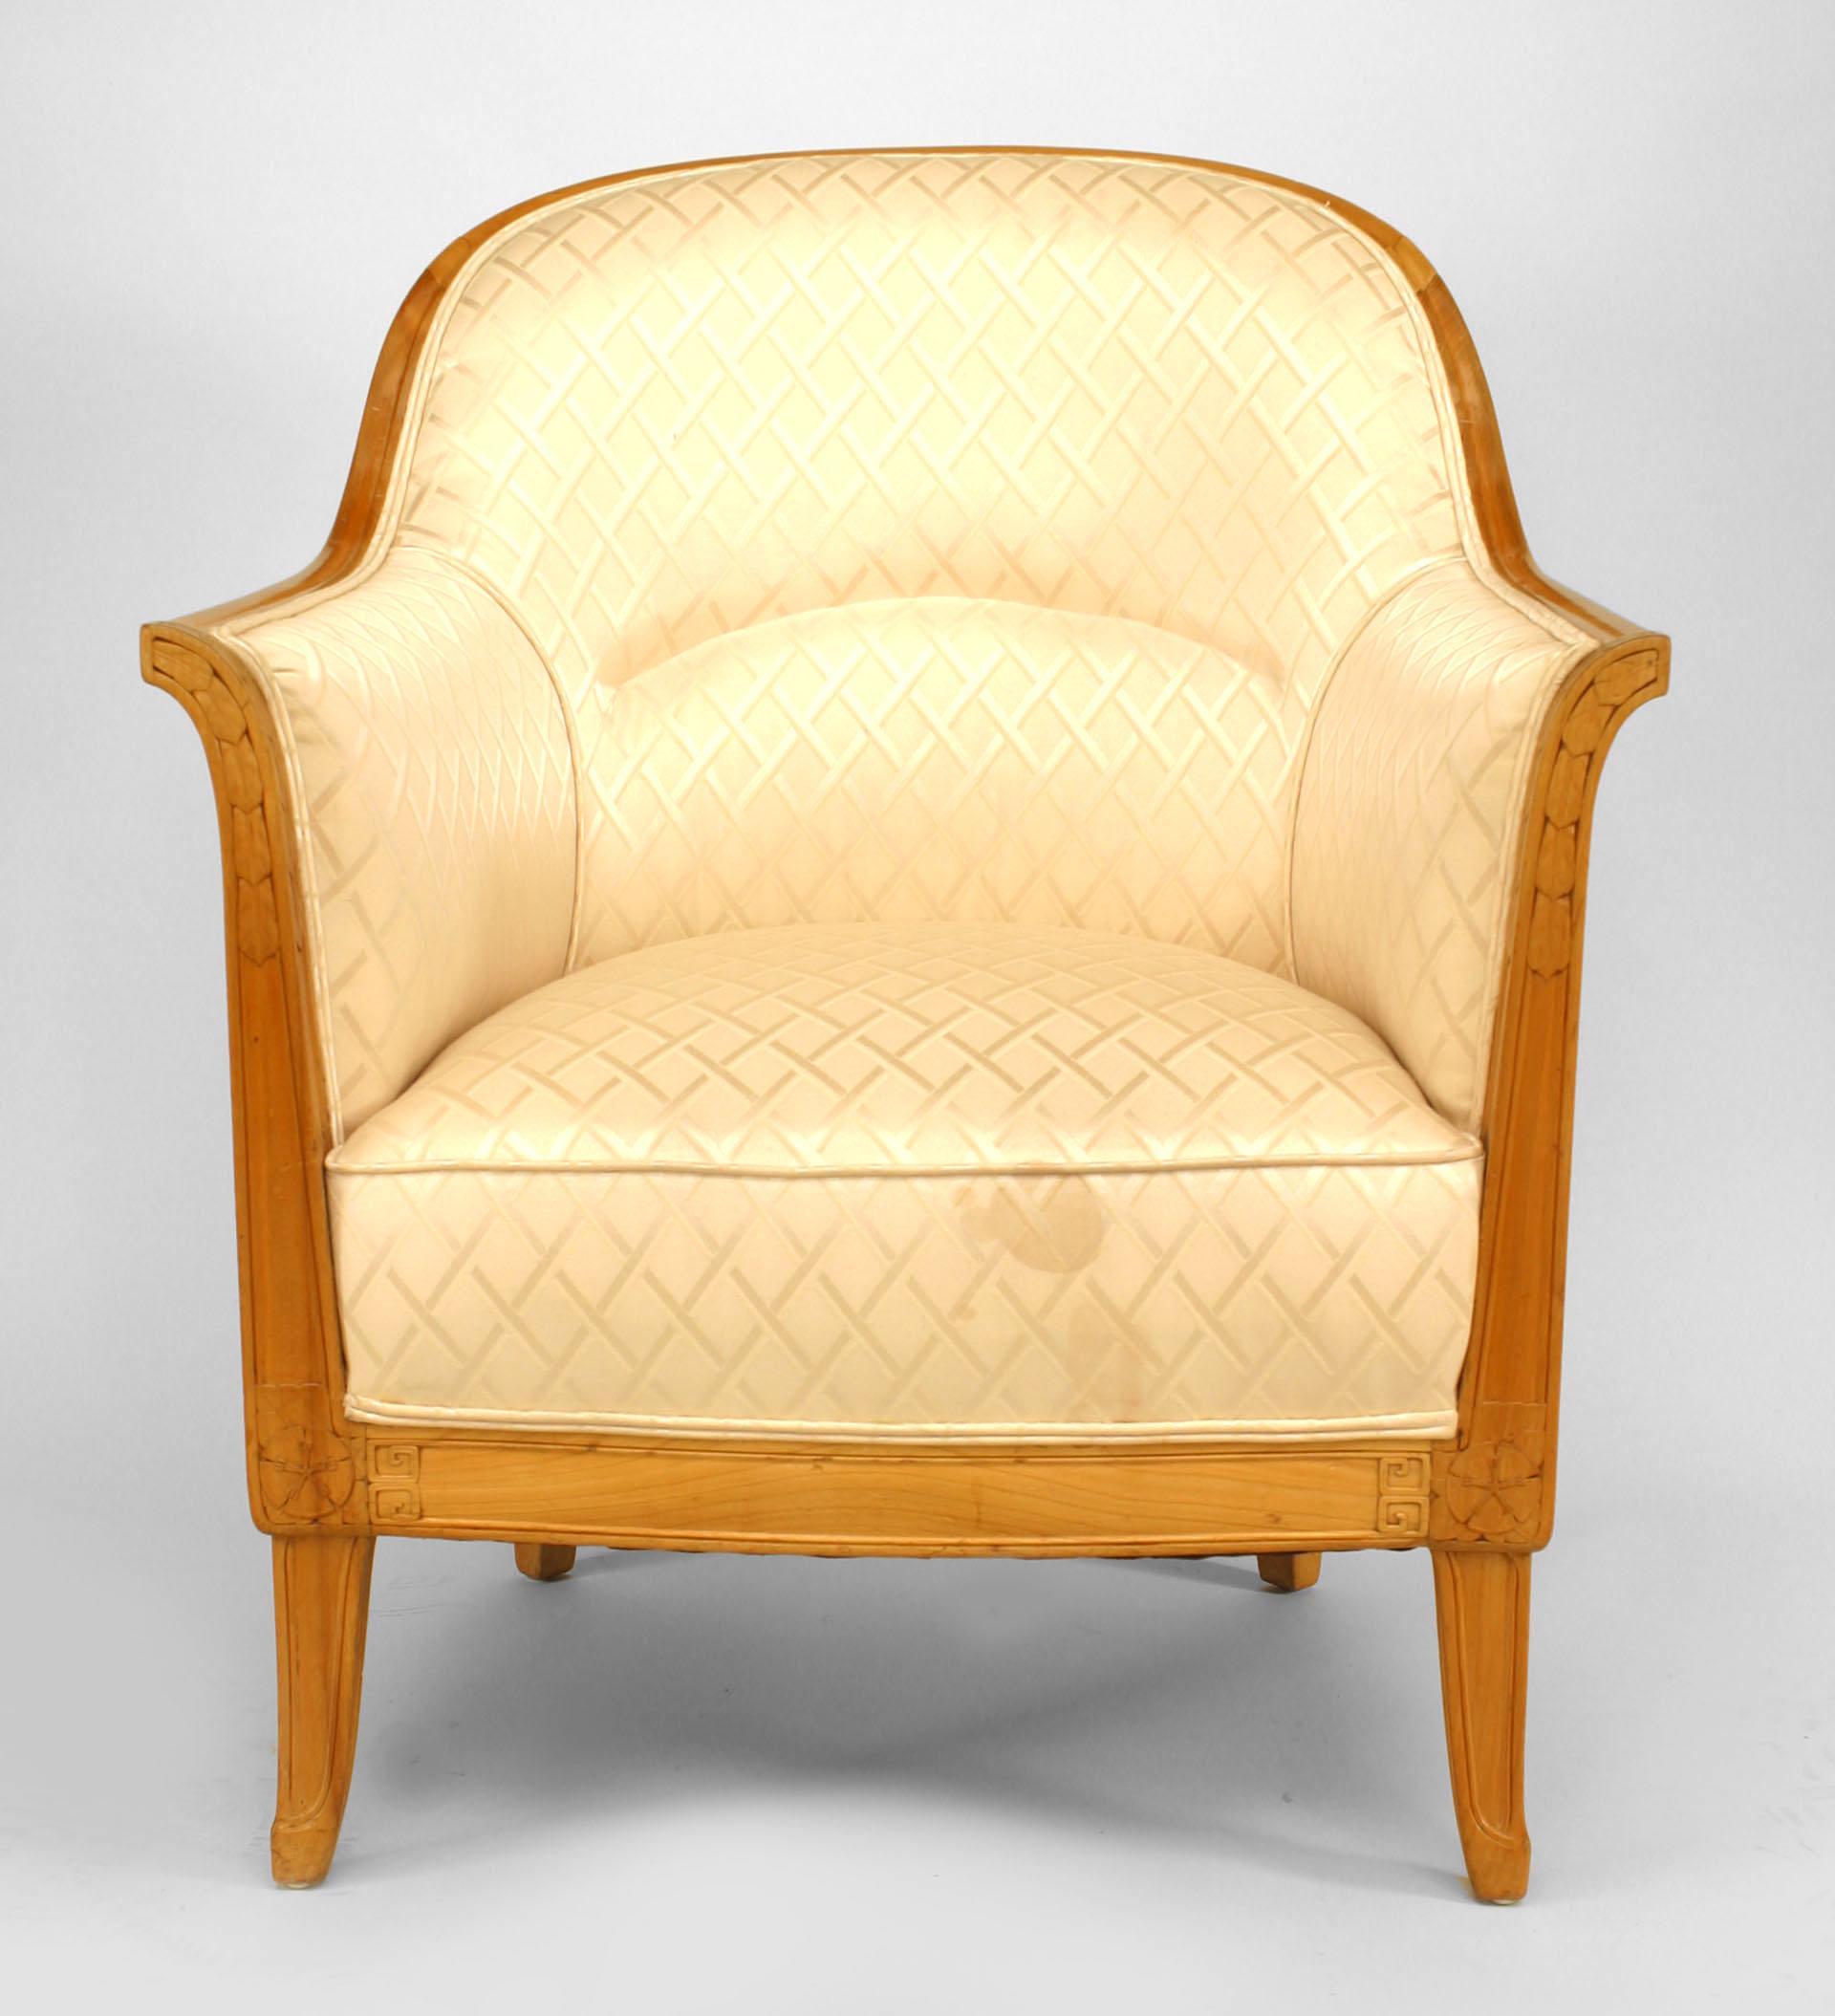 French Art Deco fruitwood bergere arm chair carved with leaf & rosette motifs and upholstered in beige silk. (Attributed to LEON JALLOT)
